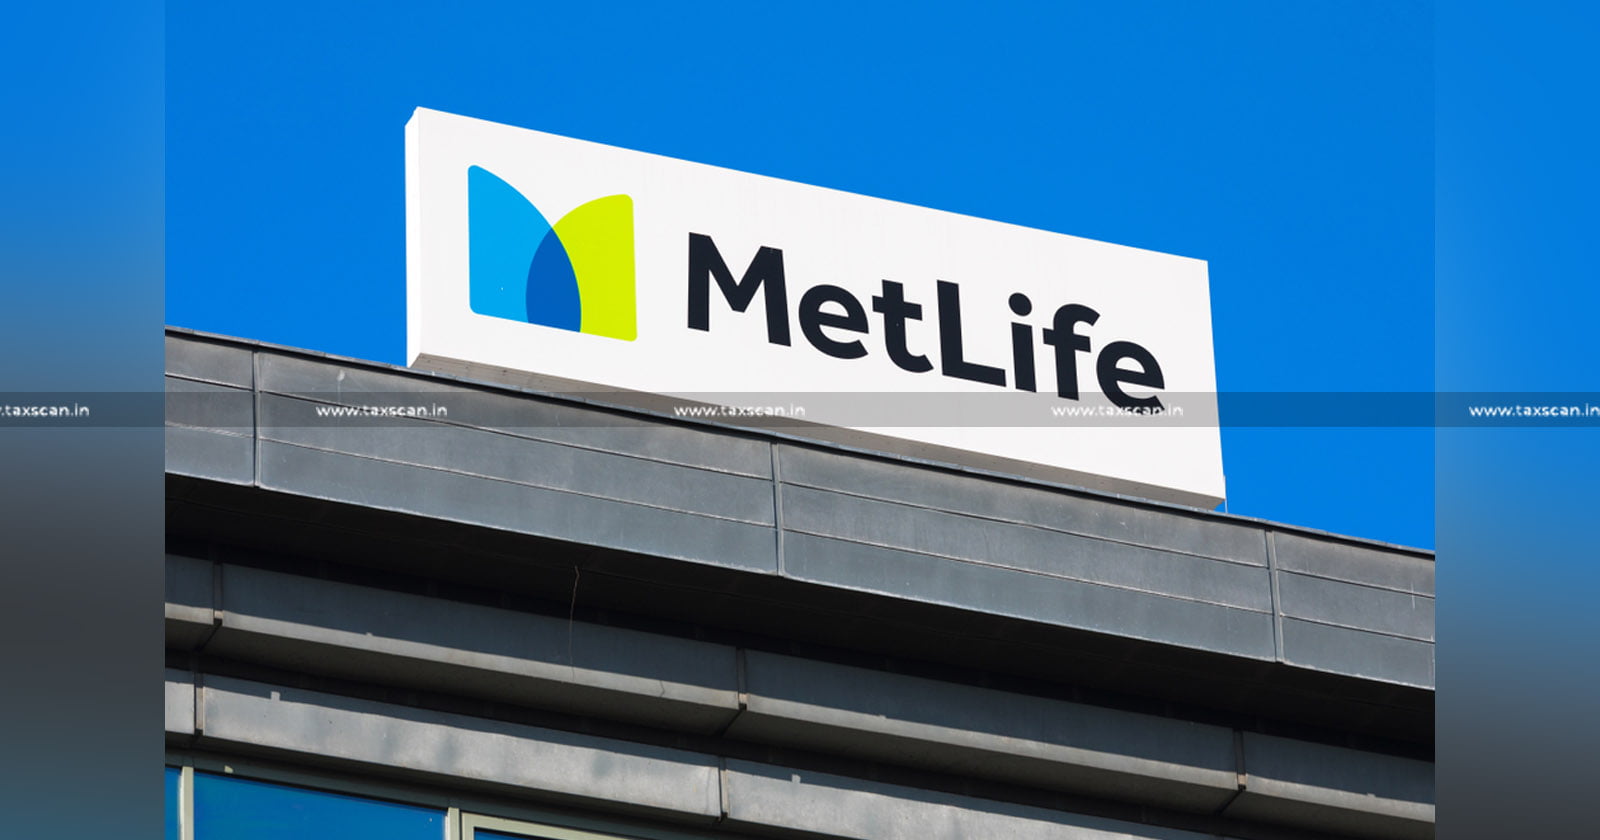 Accounting Analyst - Vacancy - Accounting Analyst Vacancy - MetLife - Vacancy in MetLife - Accounting Analyst Vacancy in MetLife - Jobscan - Taxscan